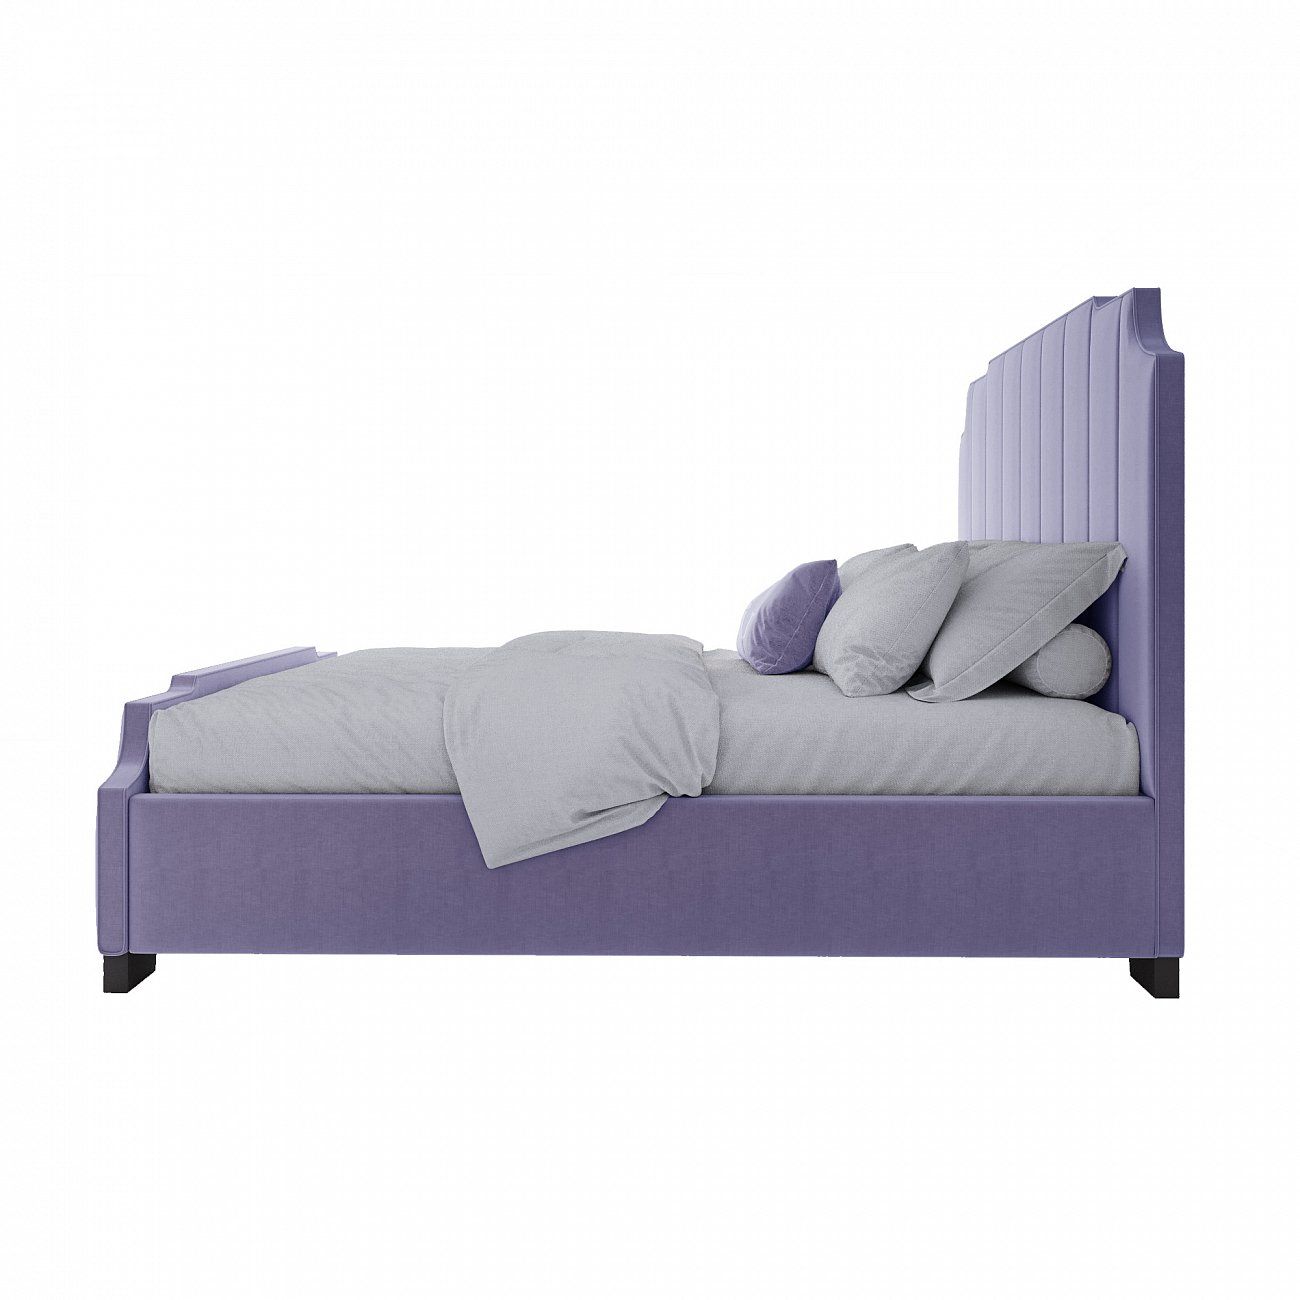 Double bed with upholstered headboard 180x200 cm purple Bony